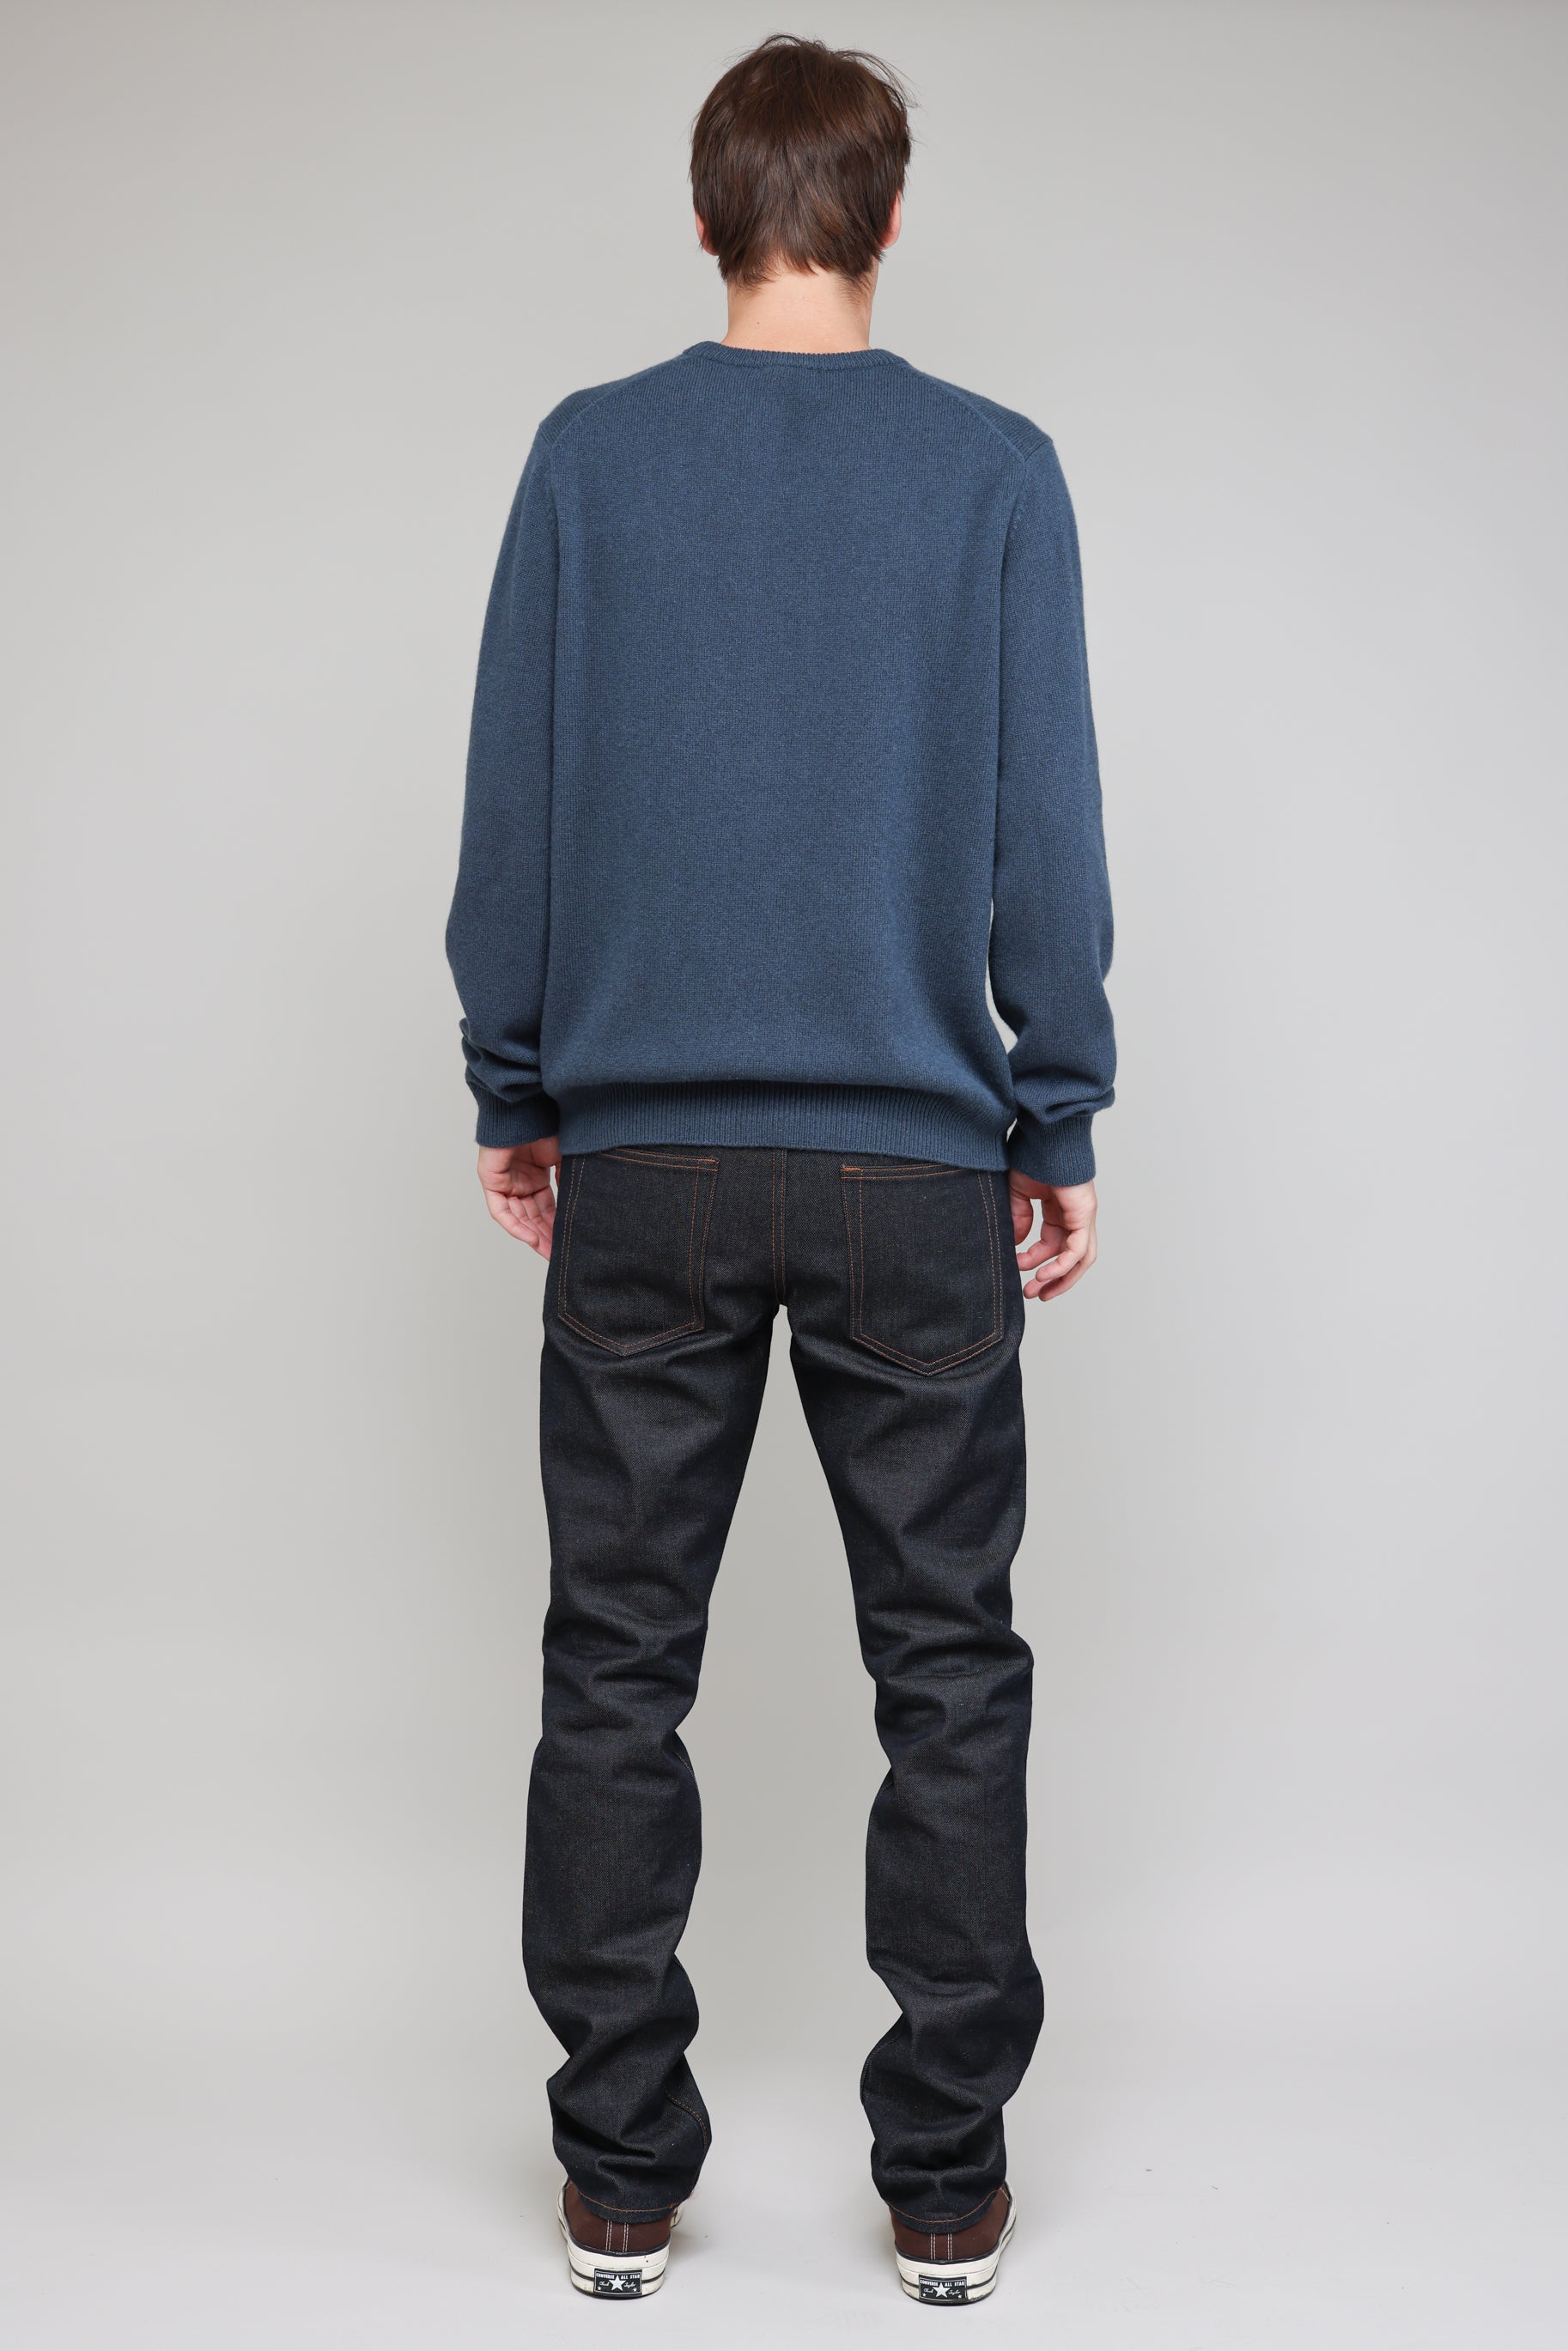 New Wool Crew in Blue 04